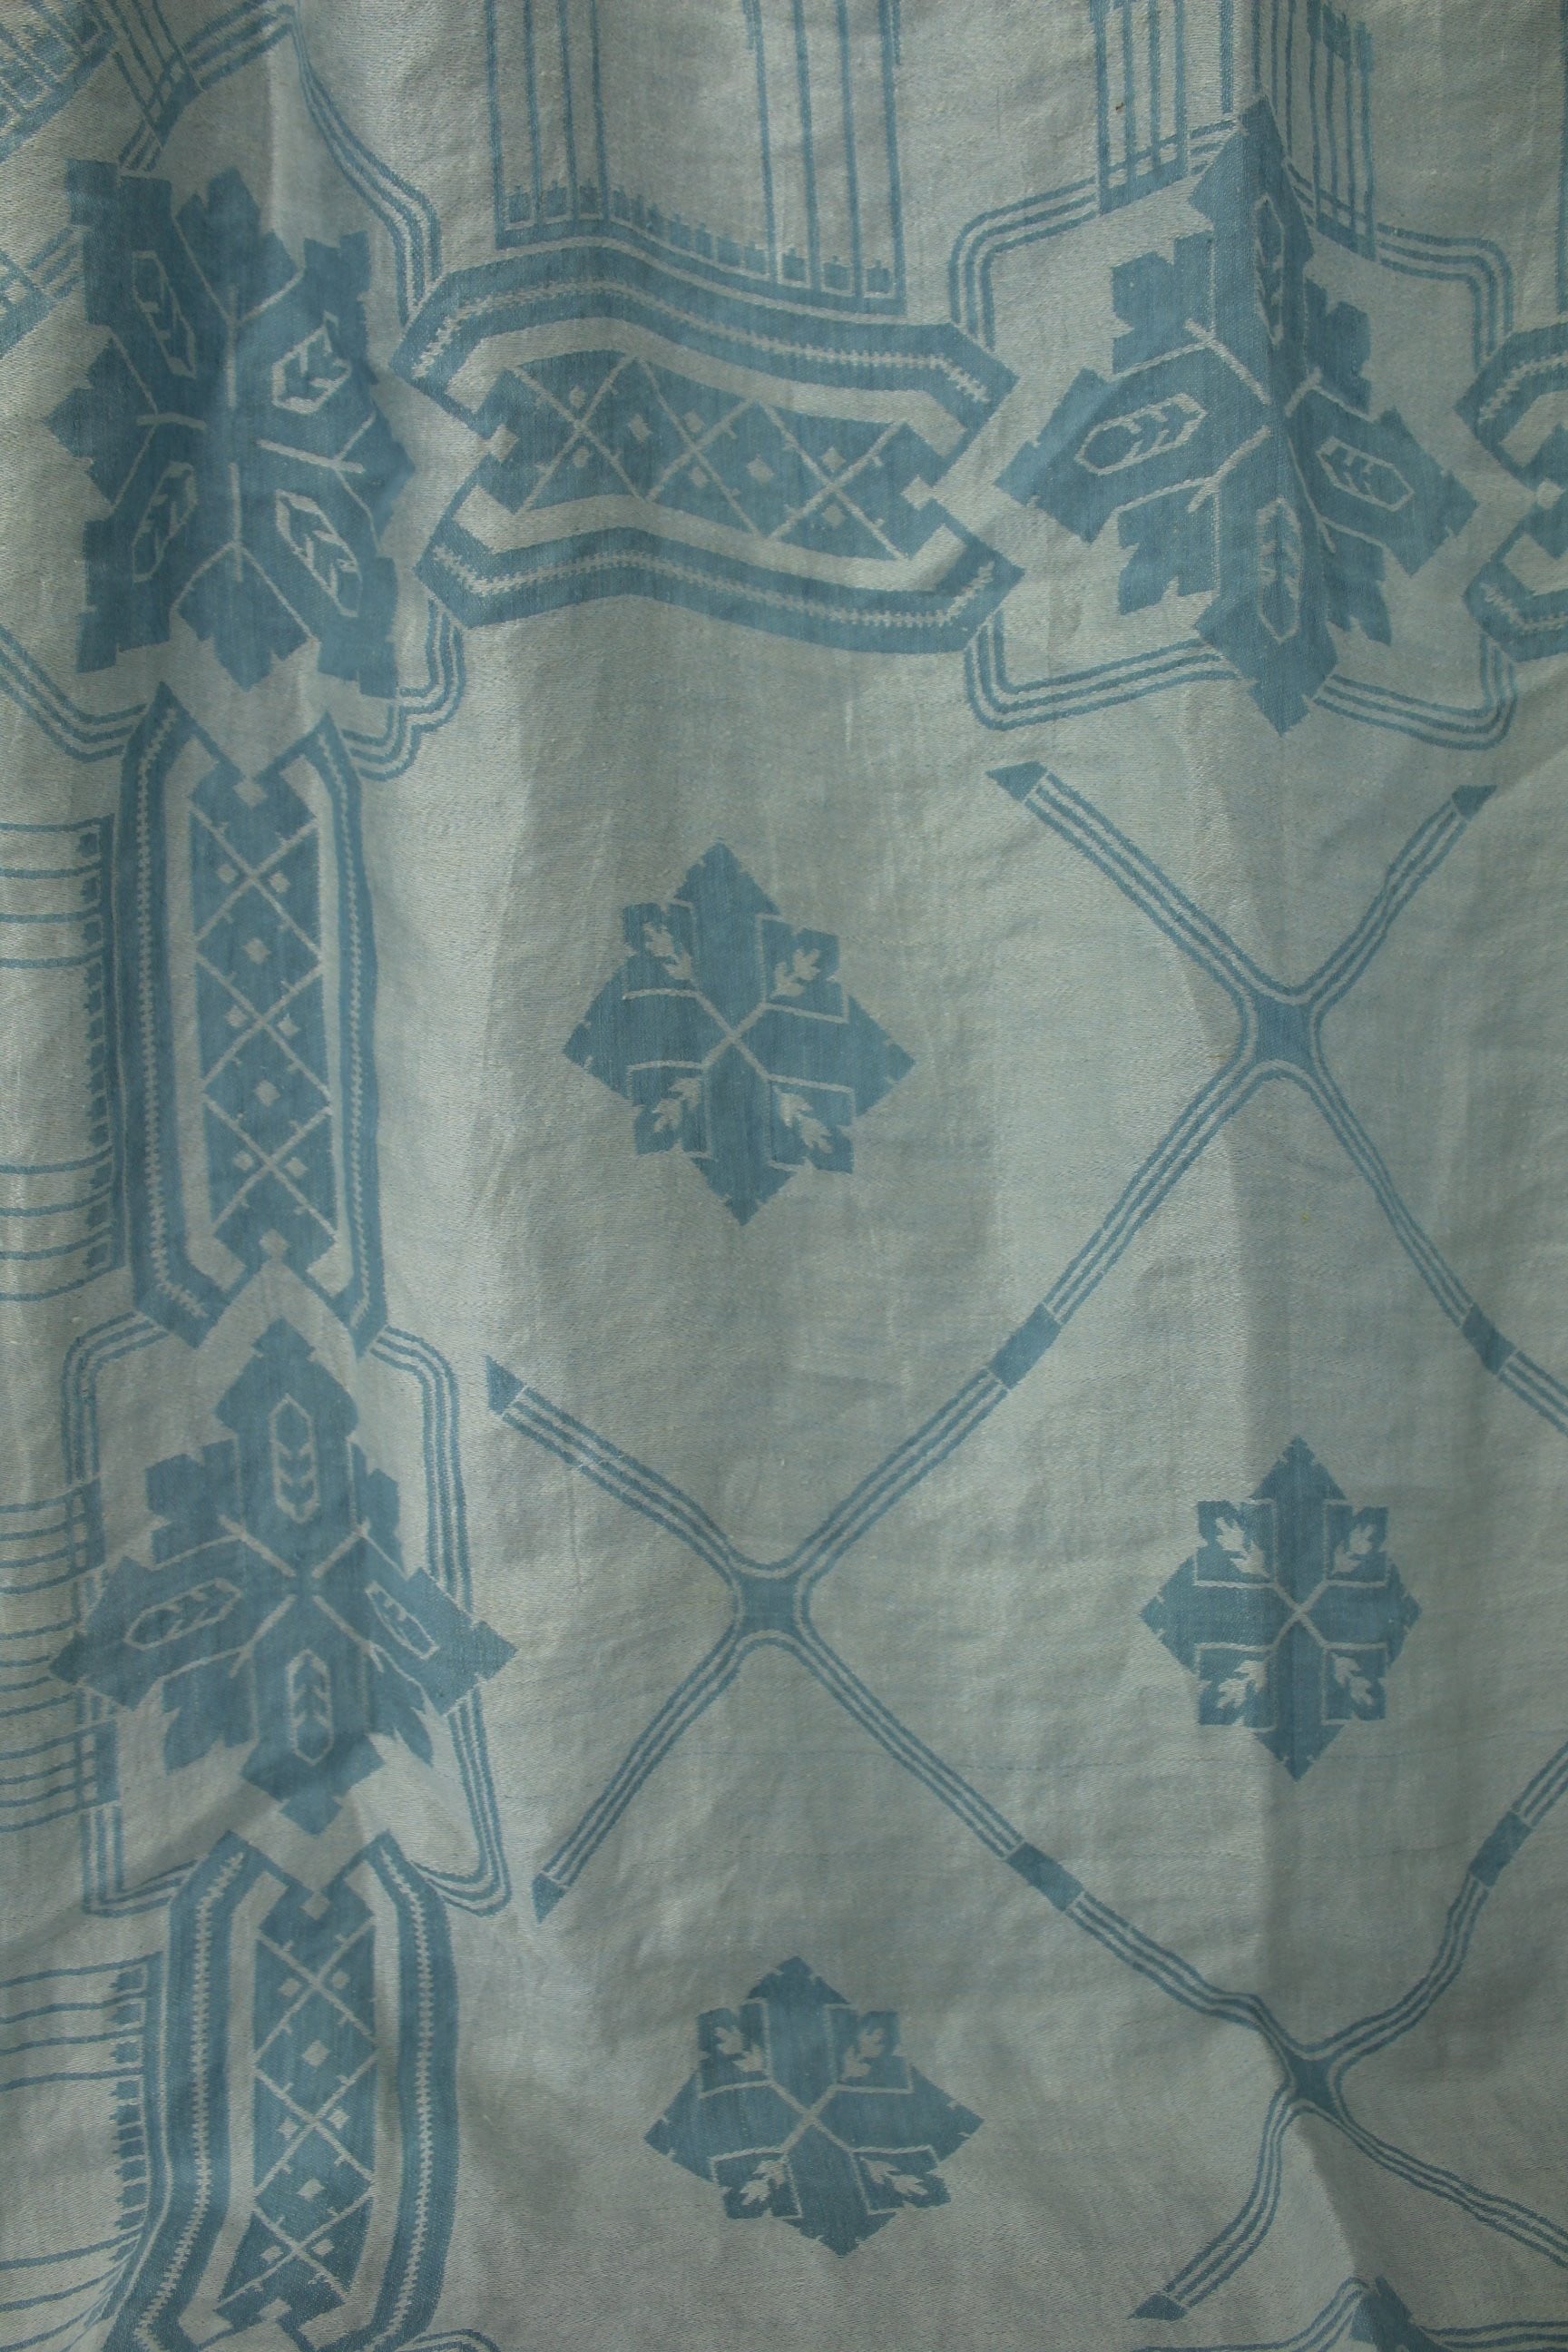 Blue Woven Tablecloth - 6 Matching Napkins - Fantastic Vintage Fabric classsic print